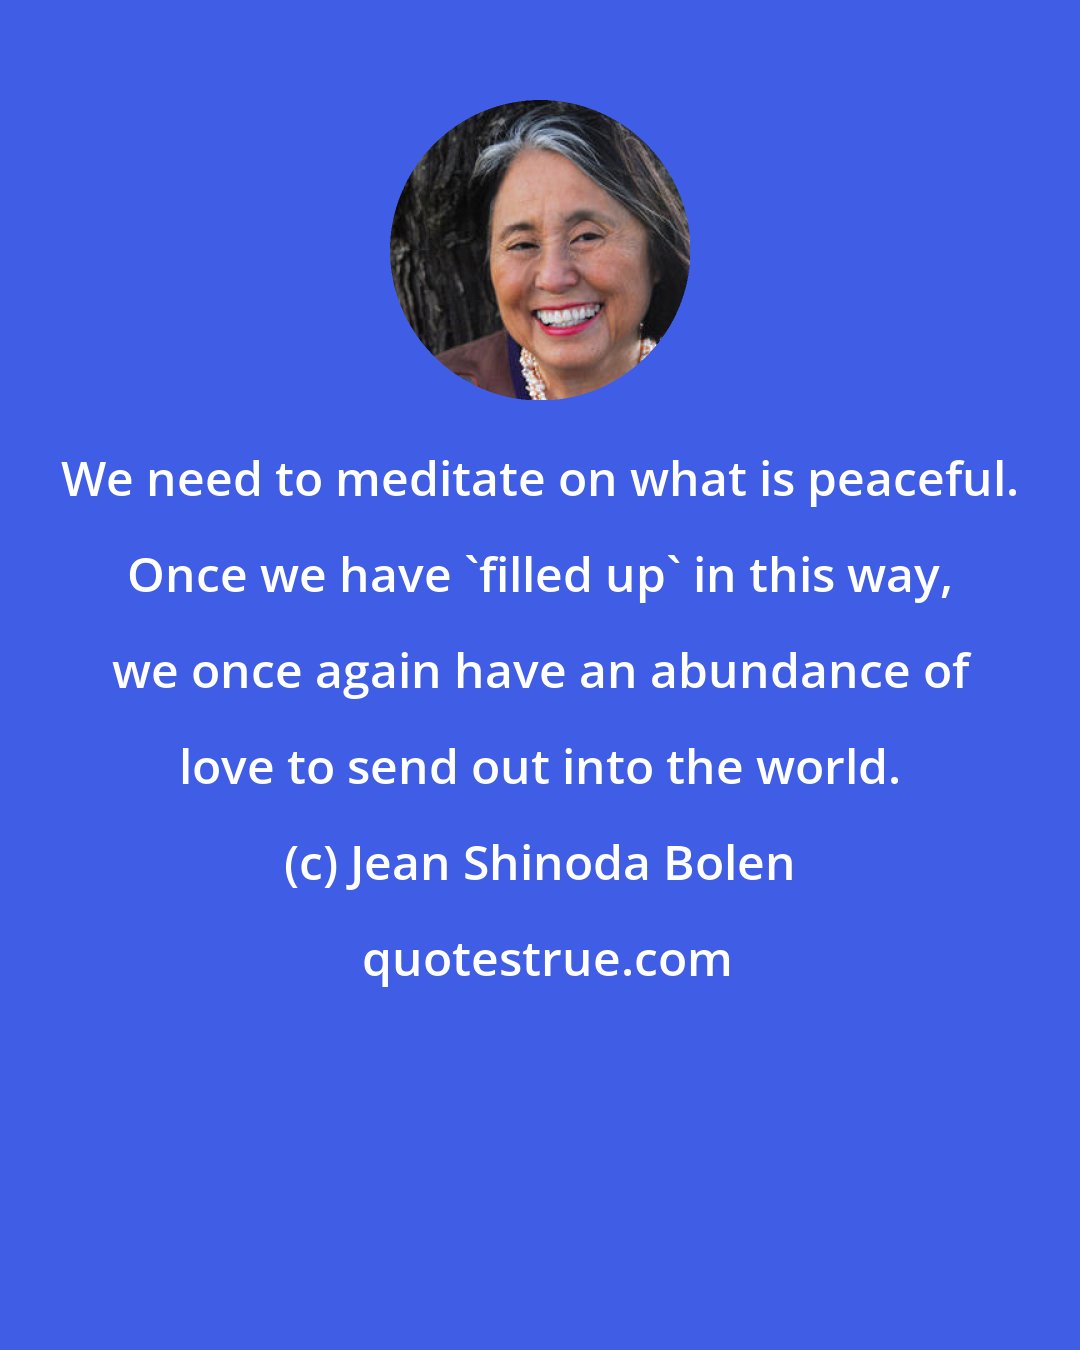 Jean Shinoda Bolen: We need to meditate on what is peaceful. Once we have 'filled up' in this way, we once again have an abundance of love to send out into the world.